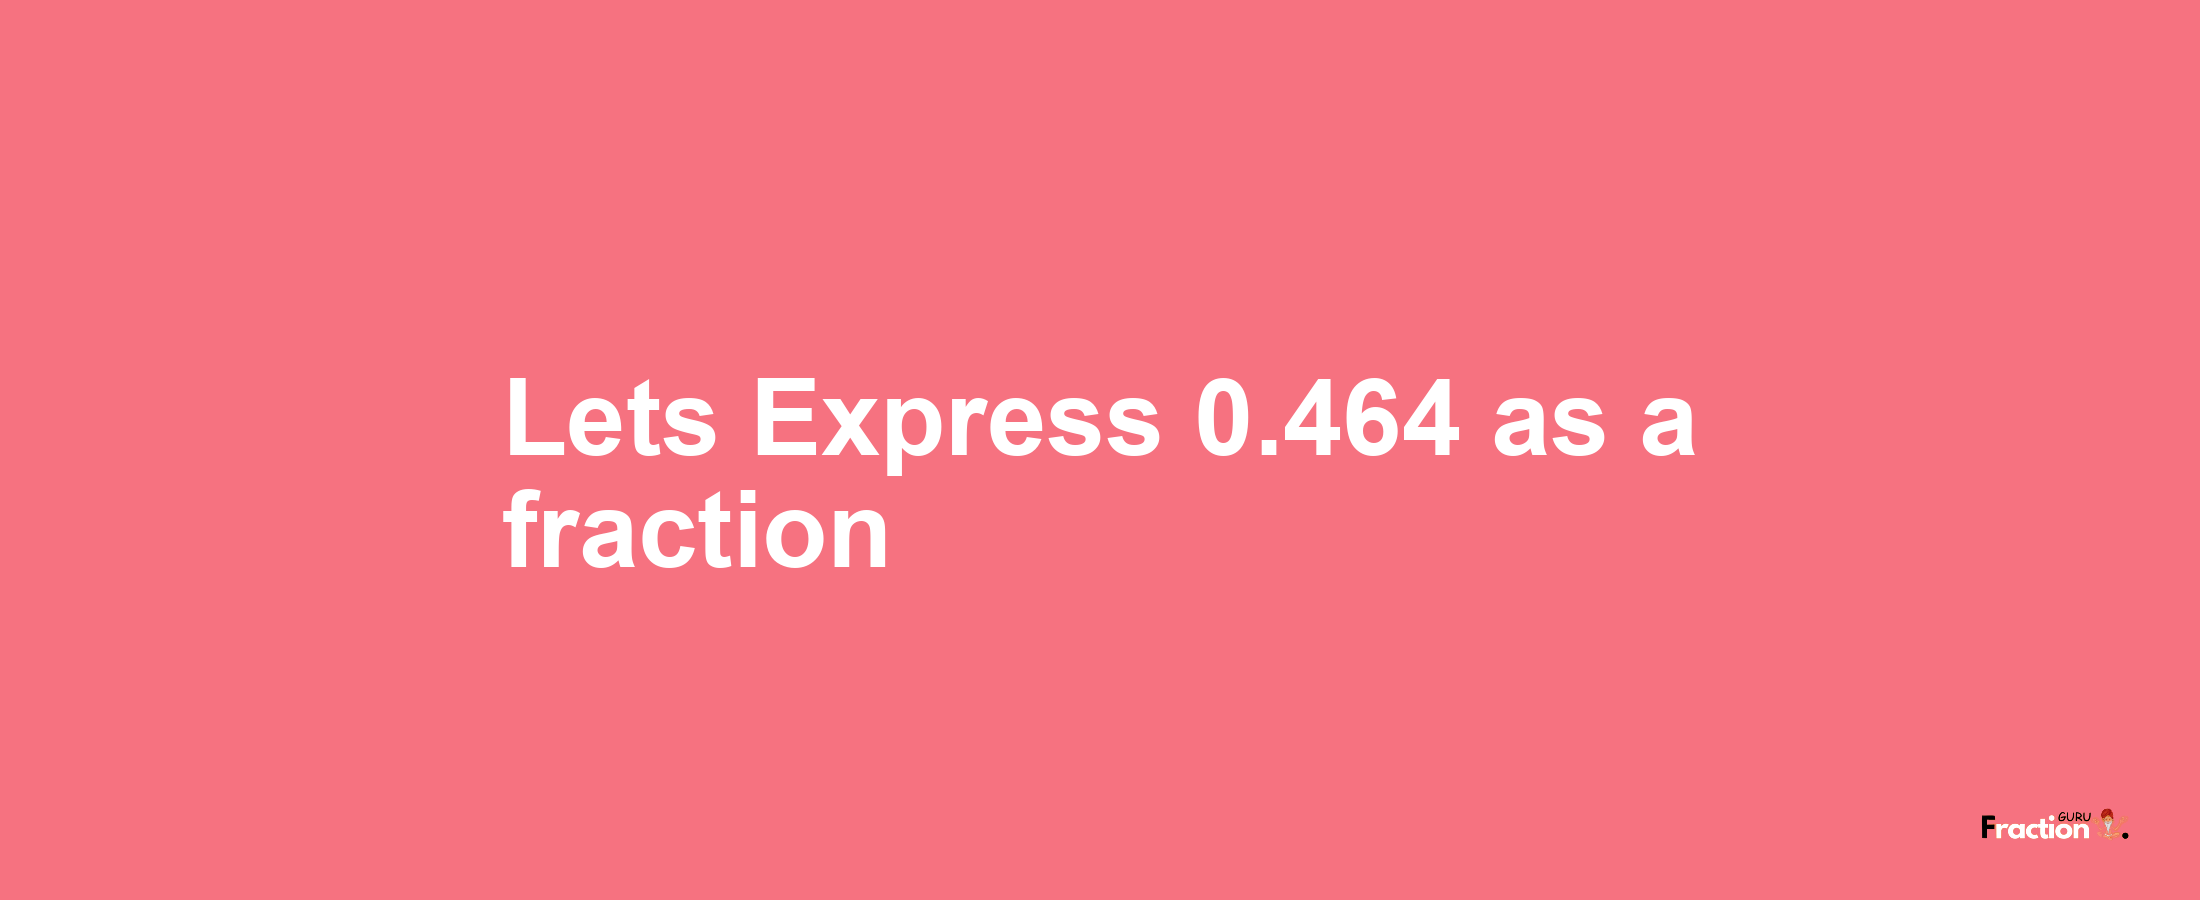 Lets Express 0.464 as afraction